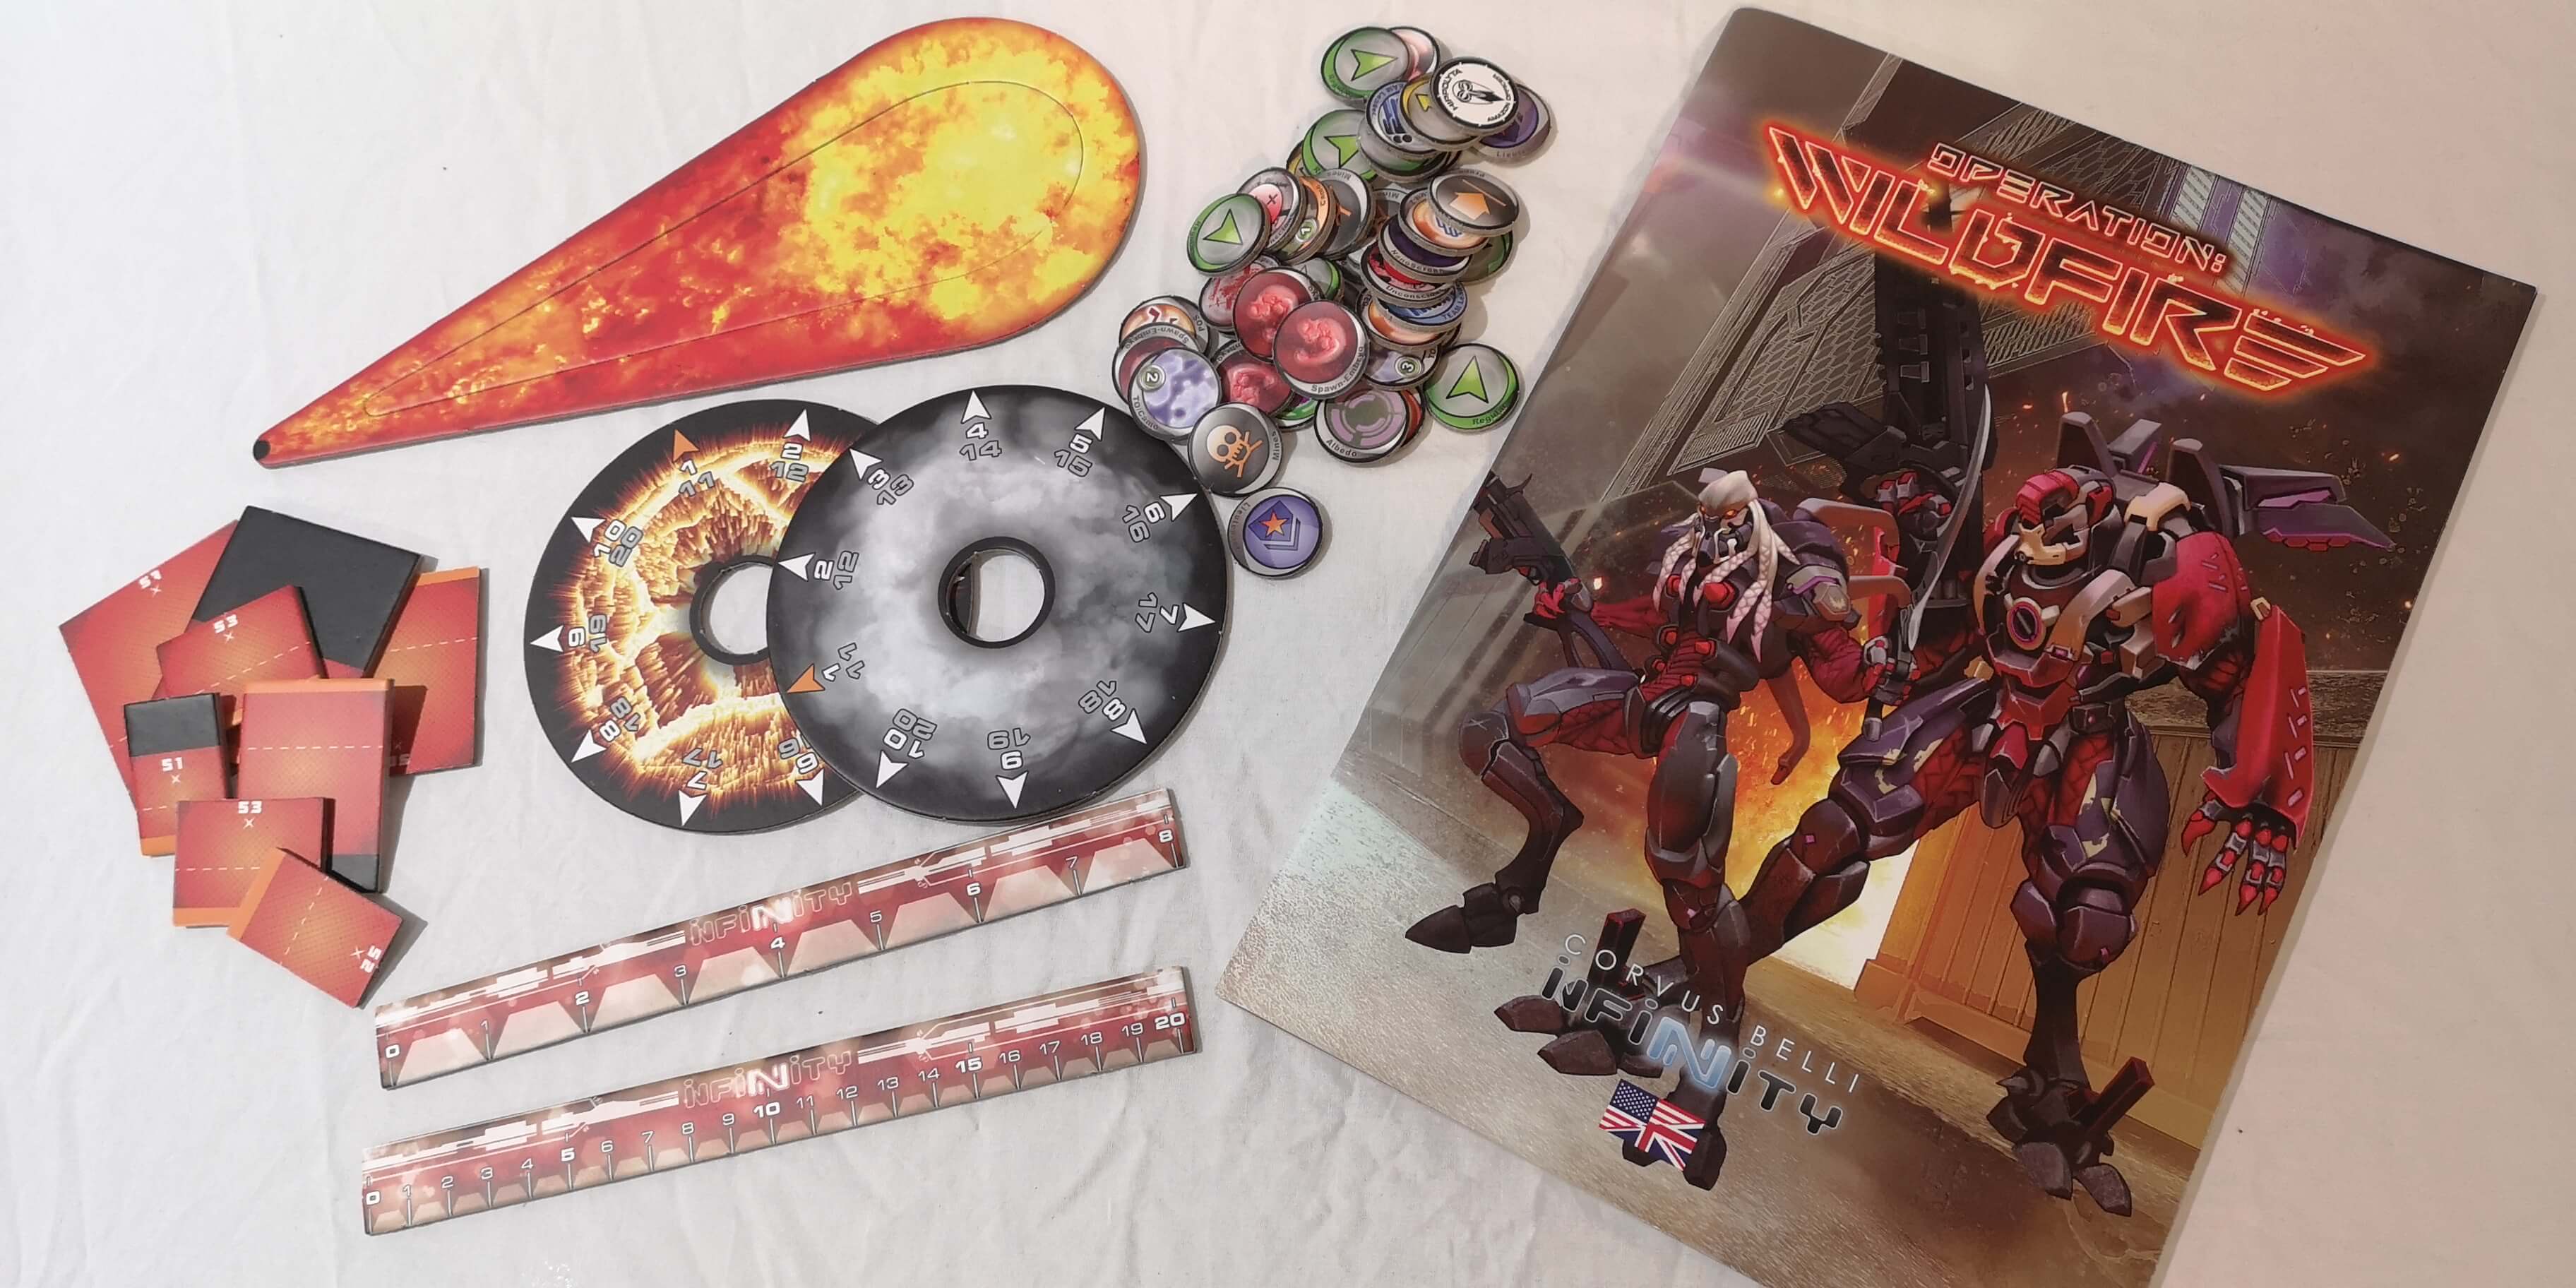 WildFire templates, tokens and rulebook.